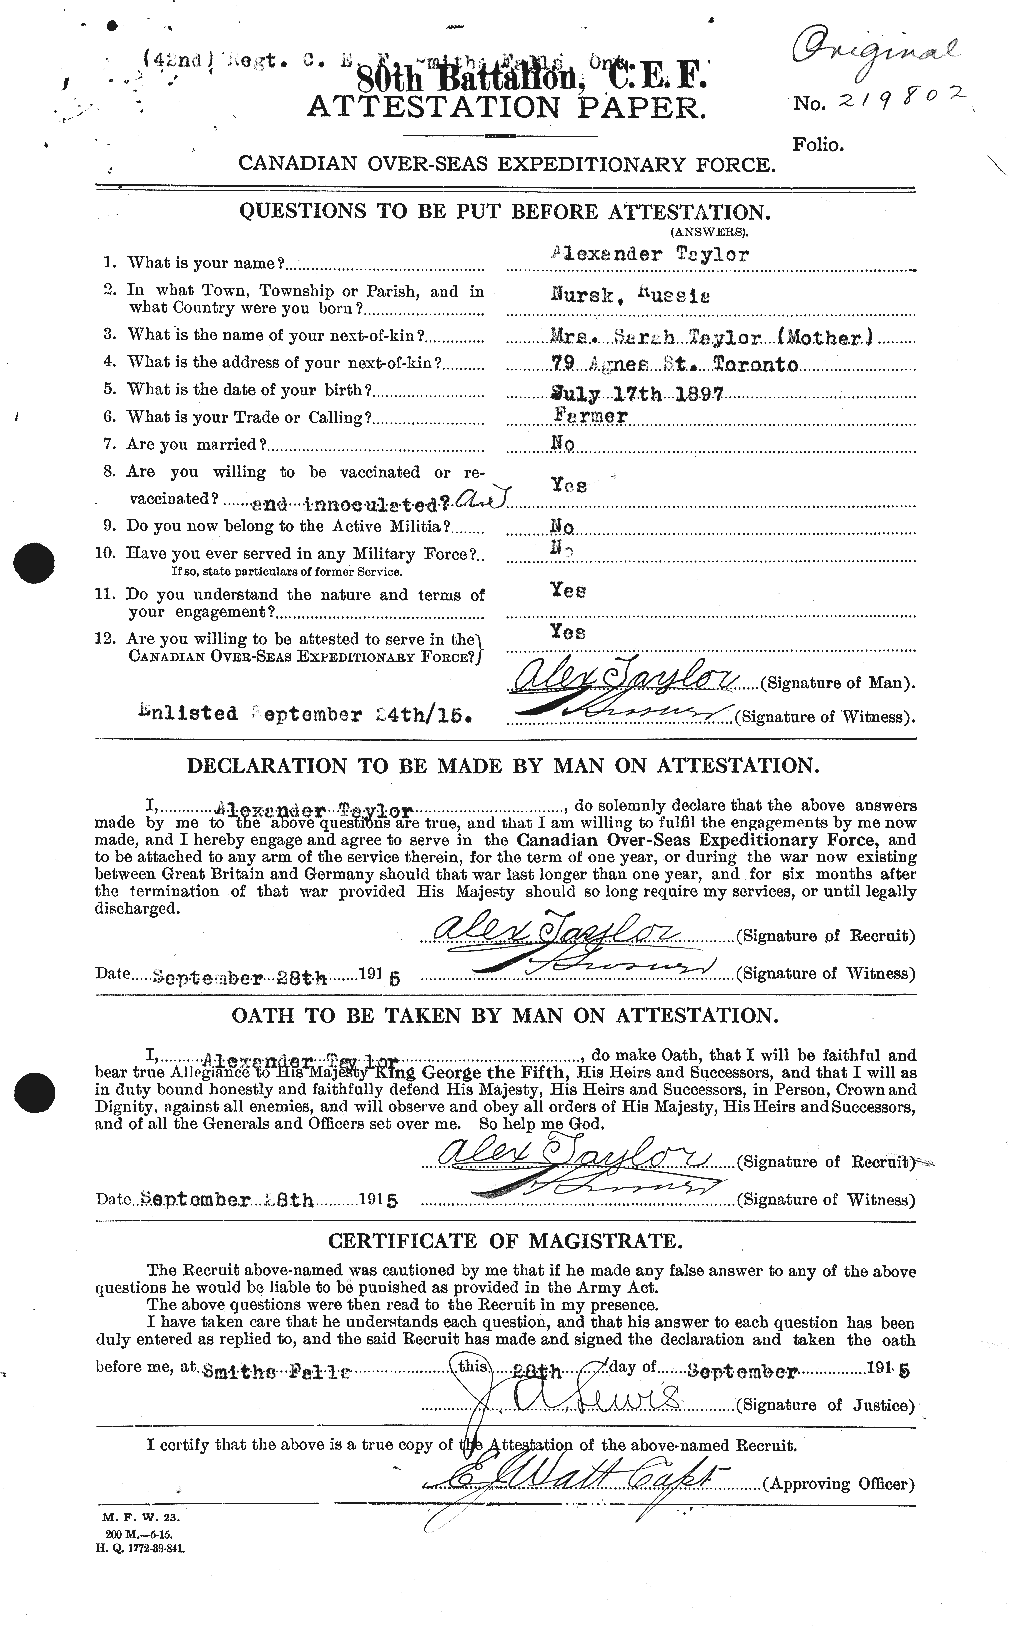 Personnel Records of the First World War - CEF 626149a